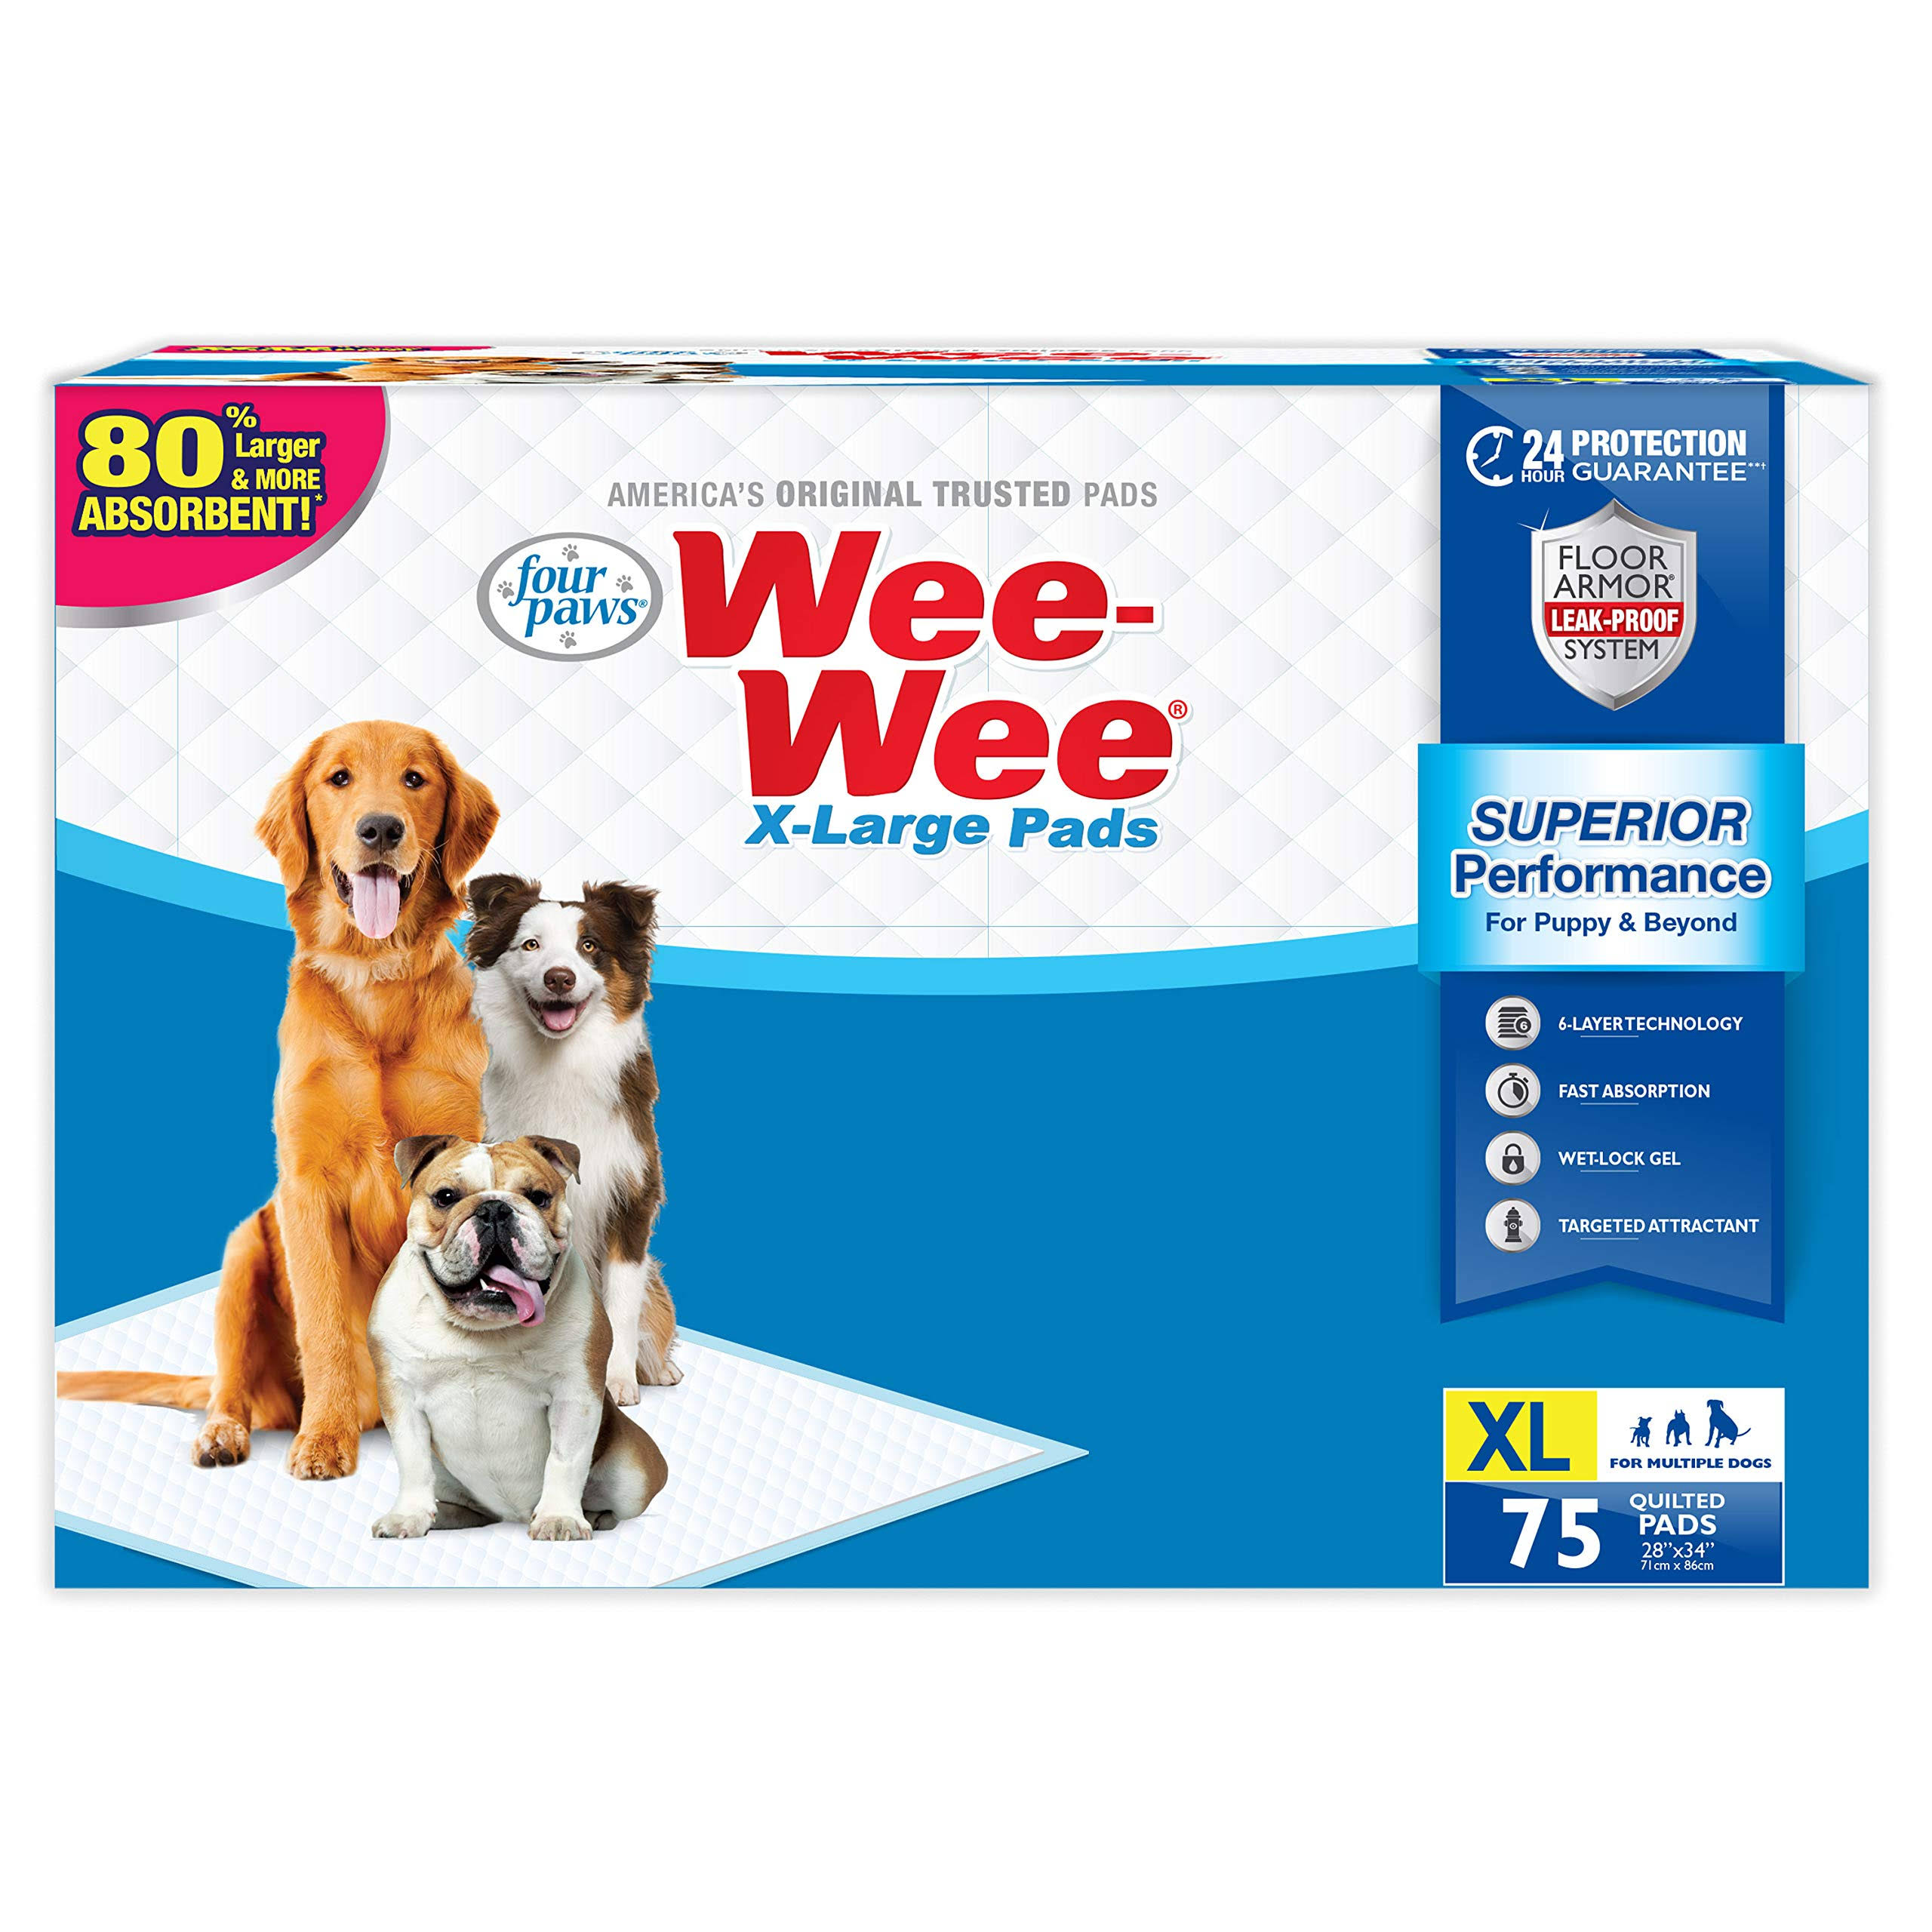 Four Paws Wee-wee Dog Training Pads - X-Large, 75ct